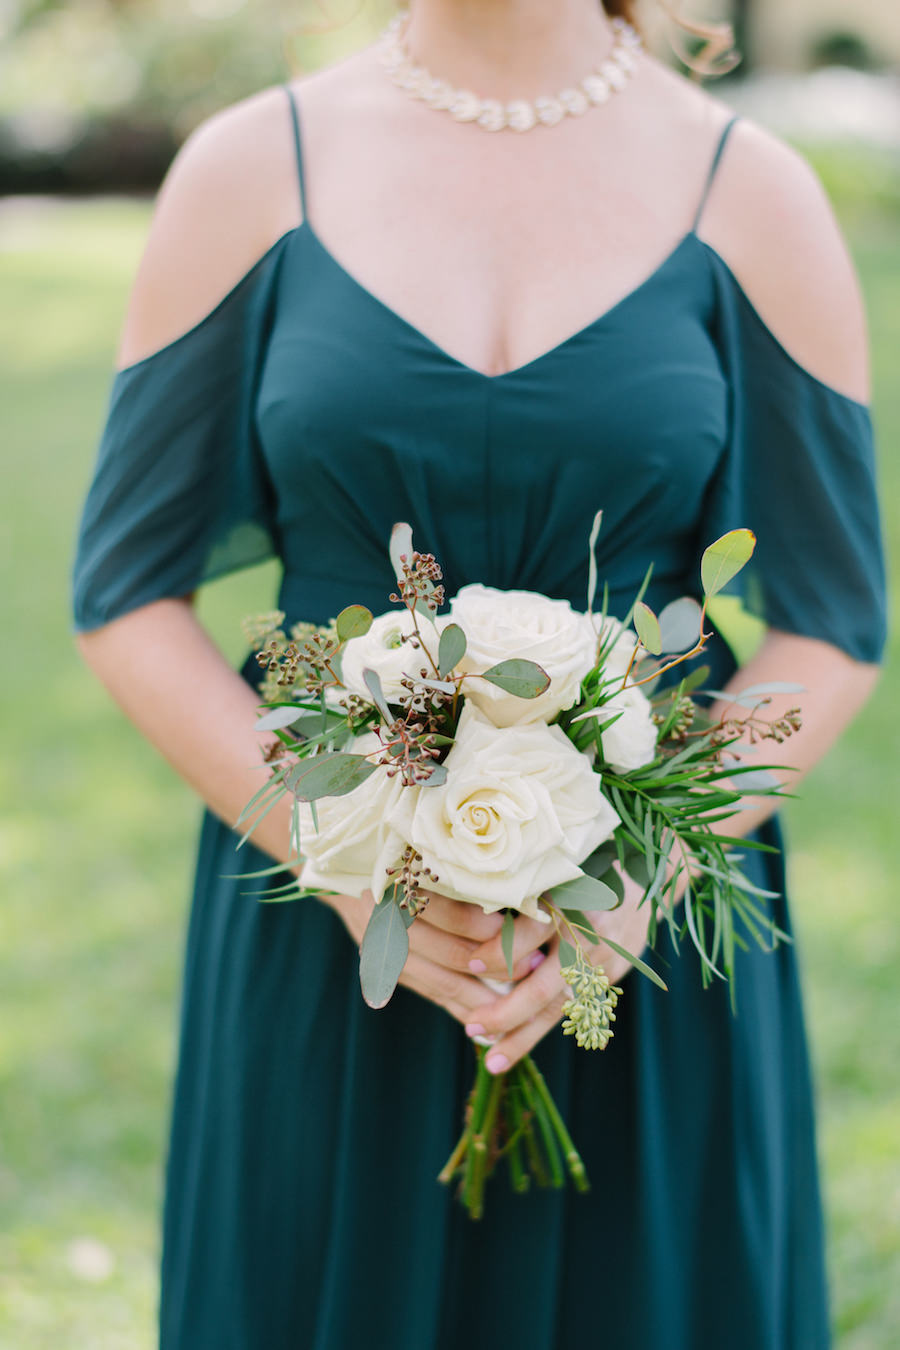 Hunter Green Chiffon Bridesmaids Dress from LuLus.com with Ivory Rose and Eucalyptus Wedding Bouquet